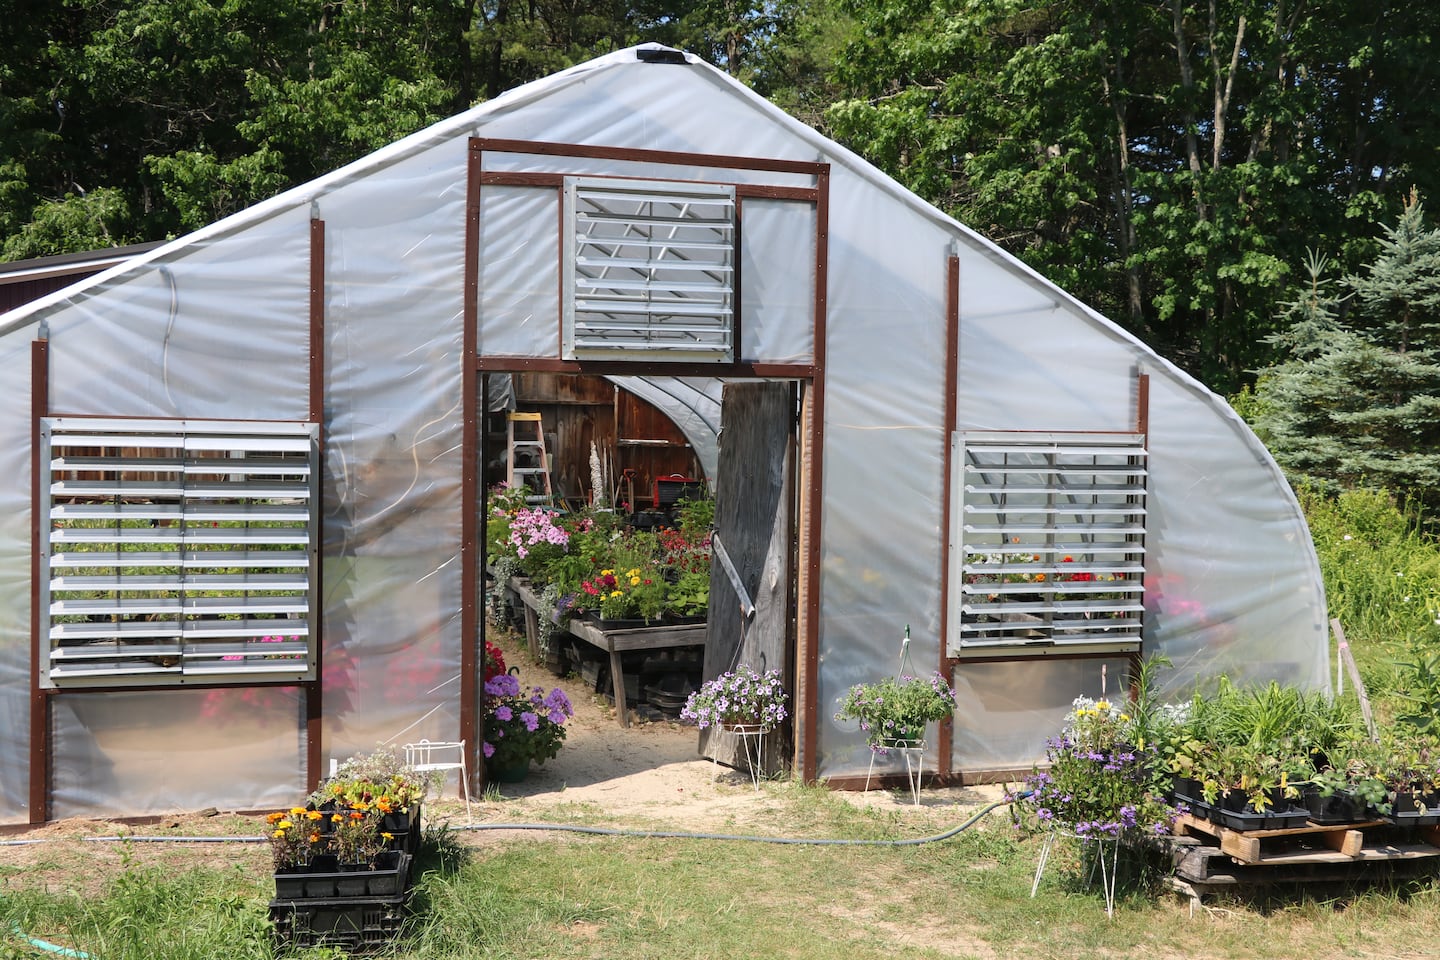 Todd Reed said the team of volunteers stripped rotten wood off the frame of the greenhouse and cut two pieces of 40-foot plastic to drape over the frame. 